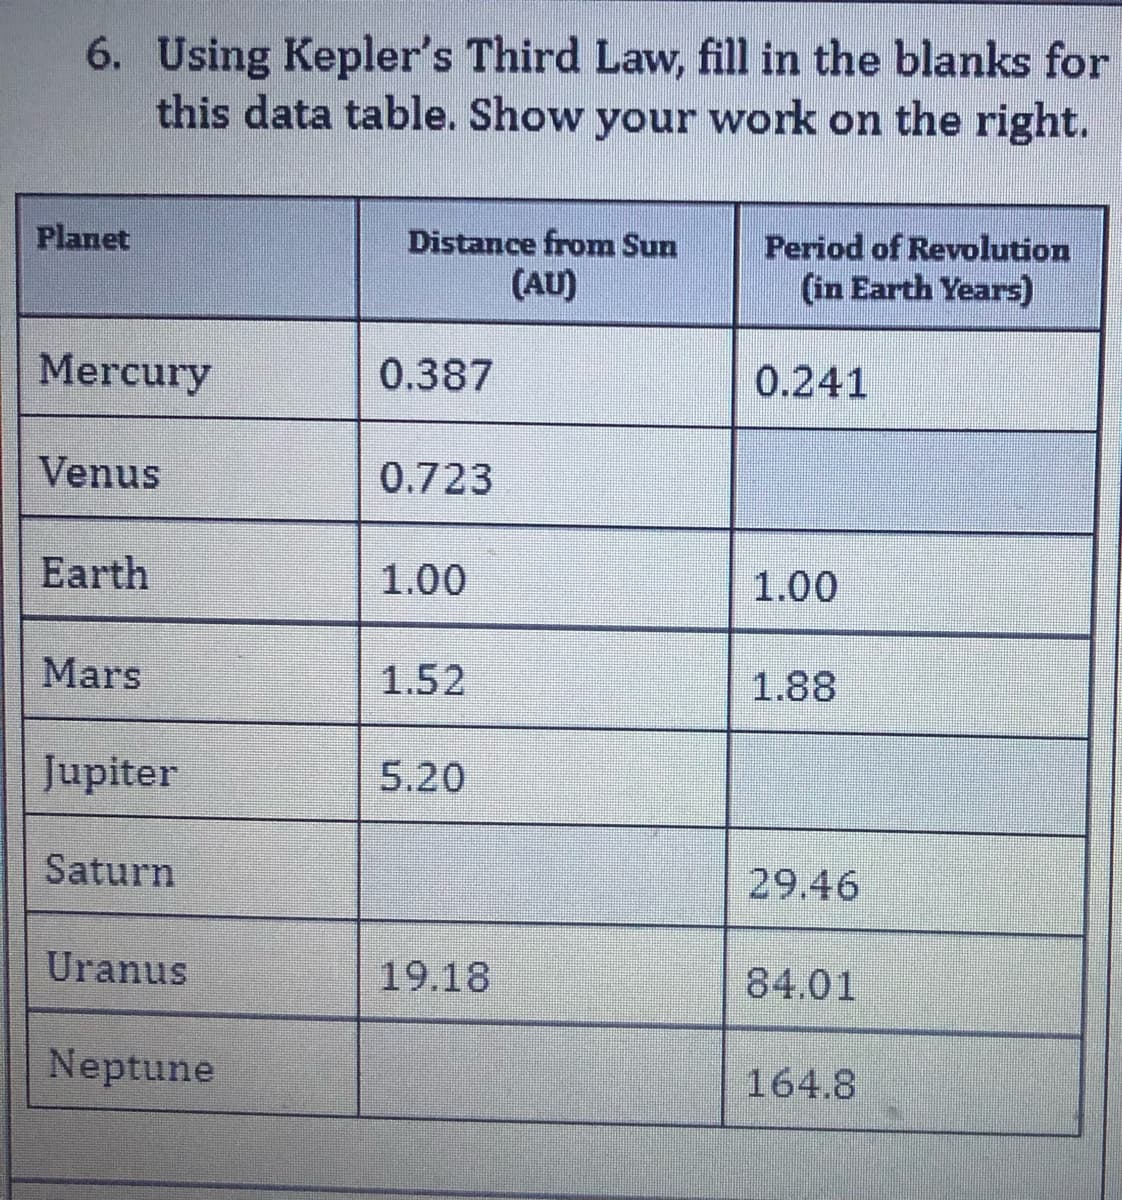 6. Using Kepler's Third Law, fill in the blanks for
this data table. Show your work on the right.
Planet
Distance from Sun
Period of Revolution
(in Earth Years)
(AU)
Mercury
0.387
0.241
Venus
0.723
Earth
1.00
1.00
Mars
1.52
1.88
Jupiter
5.20
Saturn
29.46
Uranus
19.18
84.01
Neptune
164.8
